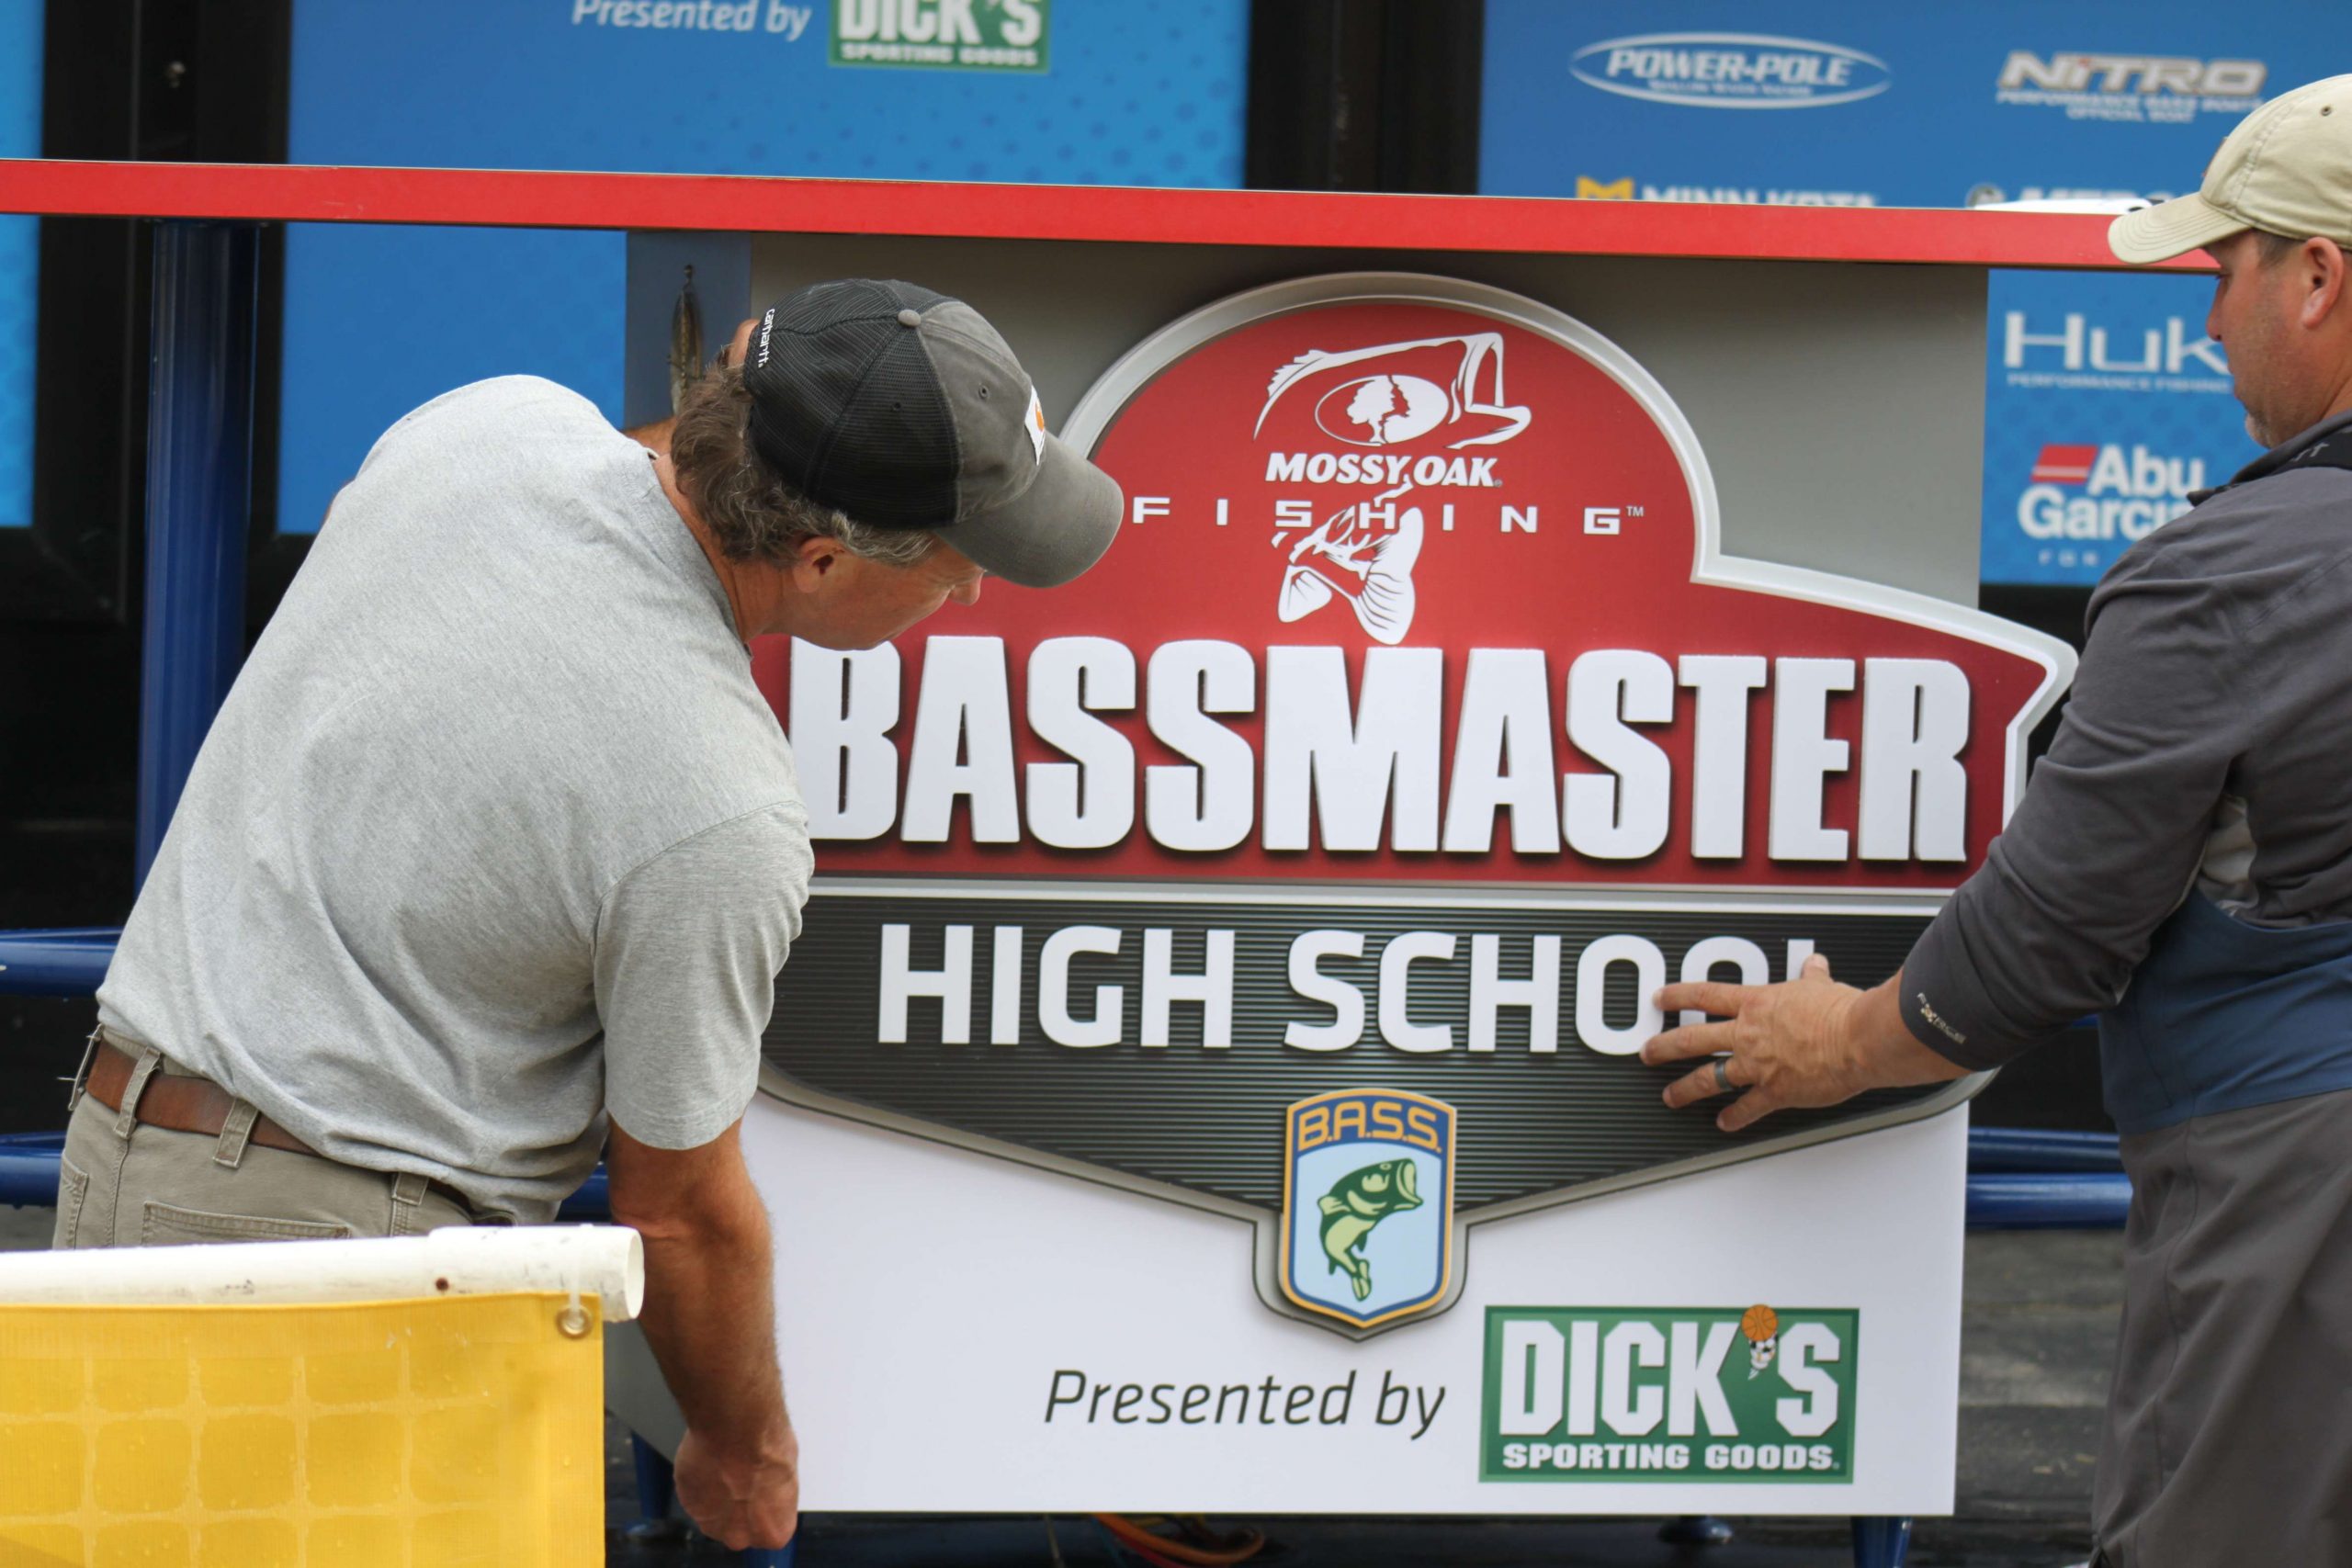 BASS staff hang the new Mossy Oak Bassmaster High school sign on the BASS stage.